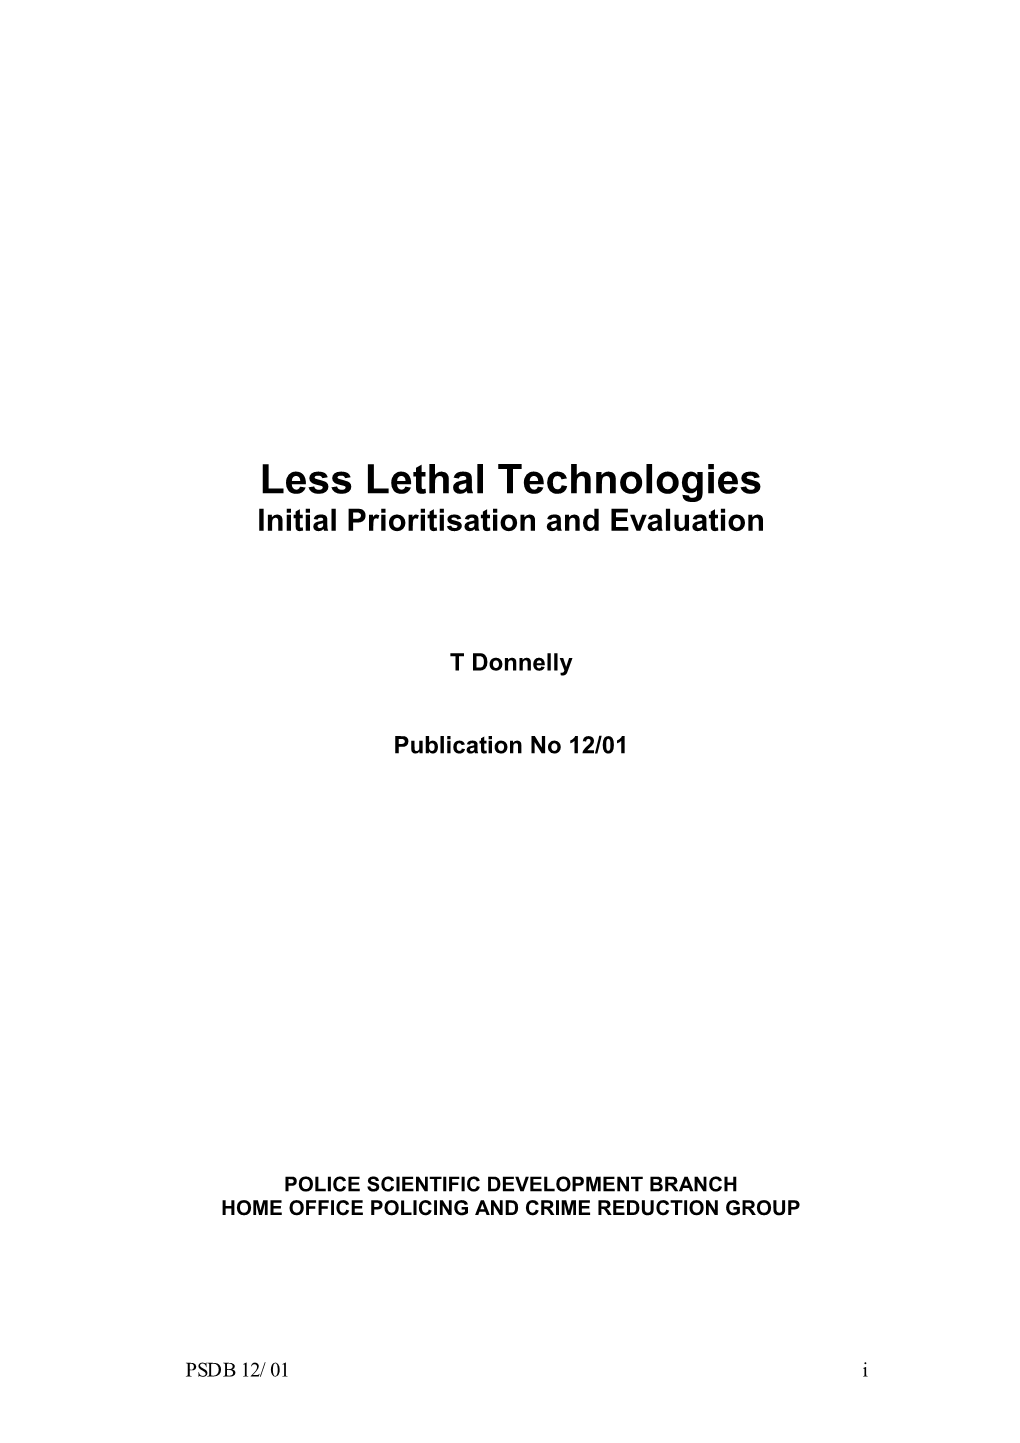 Less Lethal Technologies Initial Prioritisation and Evaluation